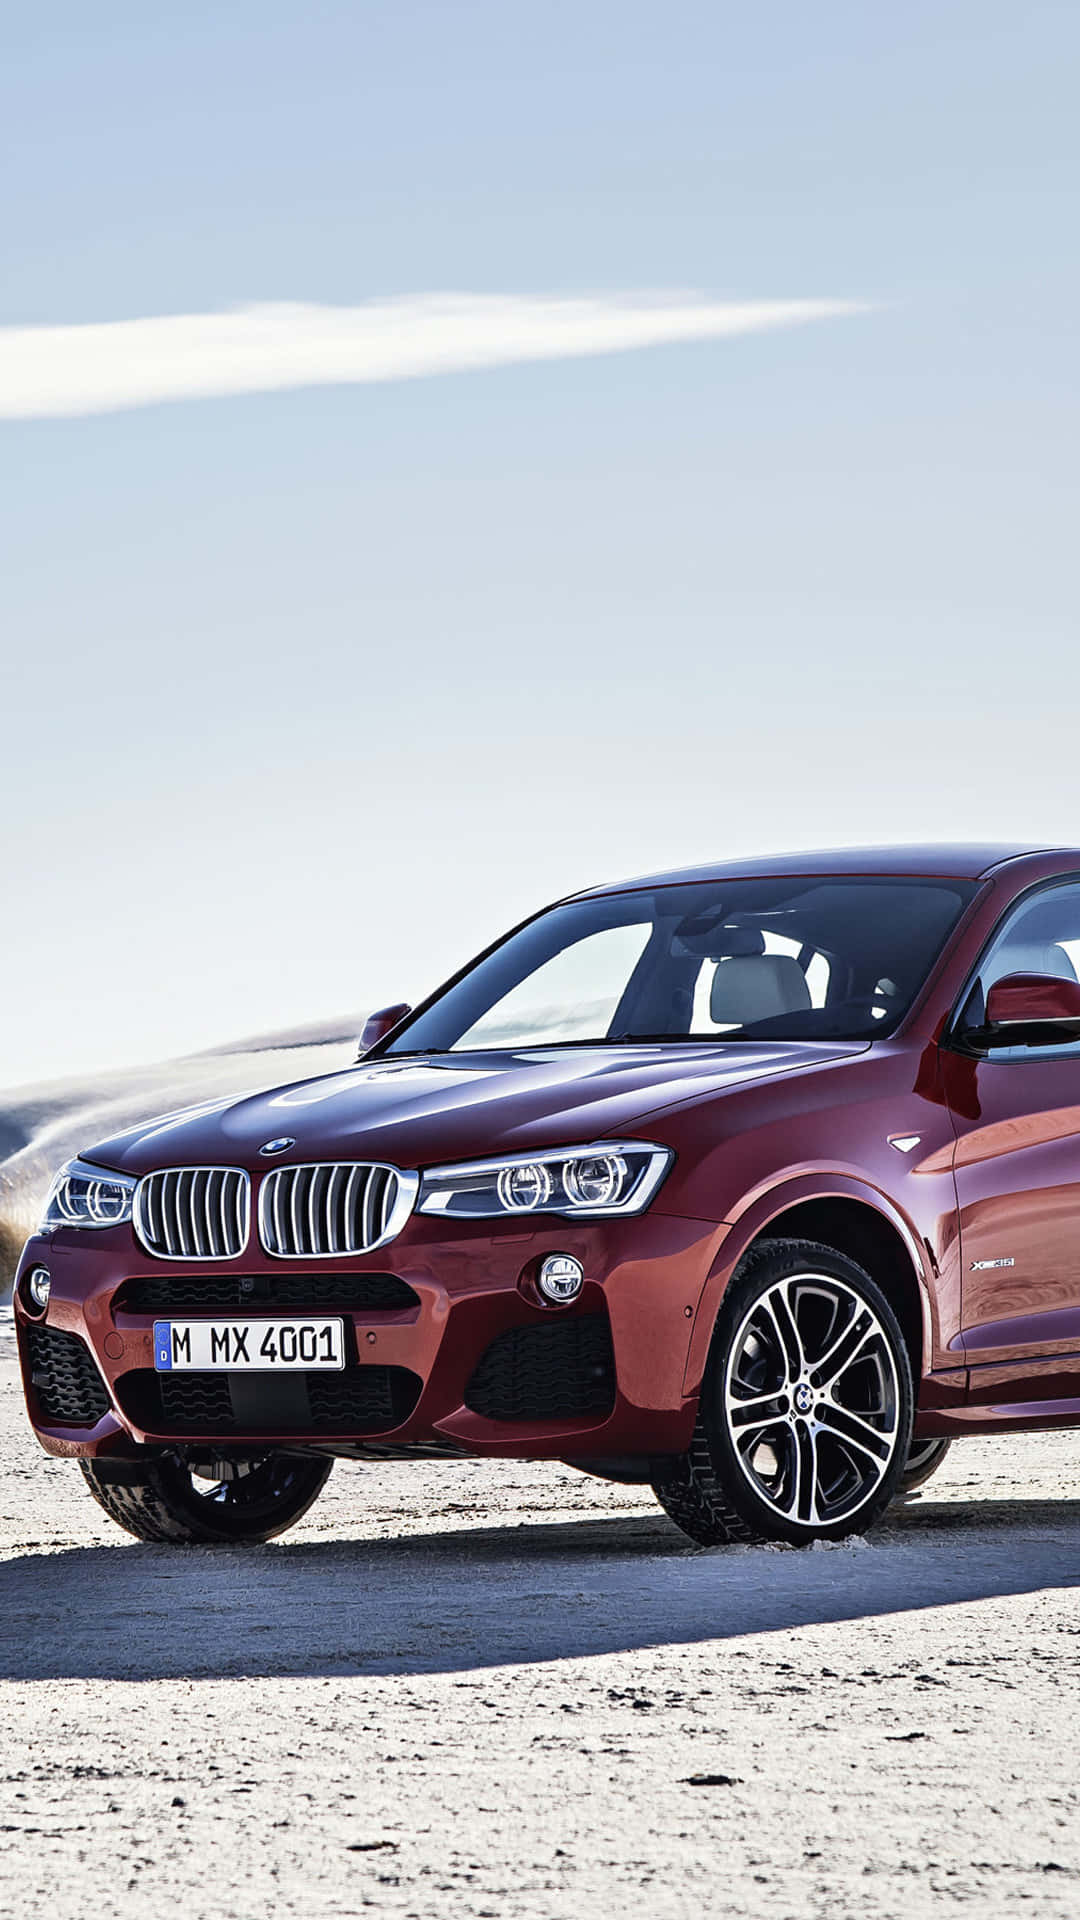 Take Your Favorite Ride to the Next Level with BMW Android Wallpaper